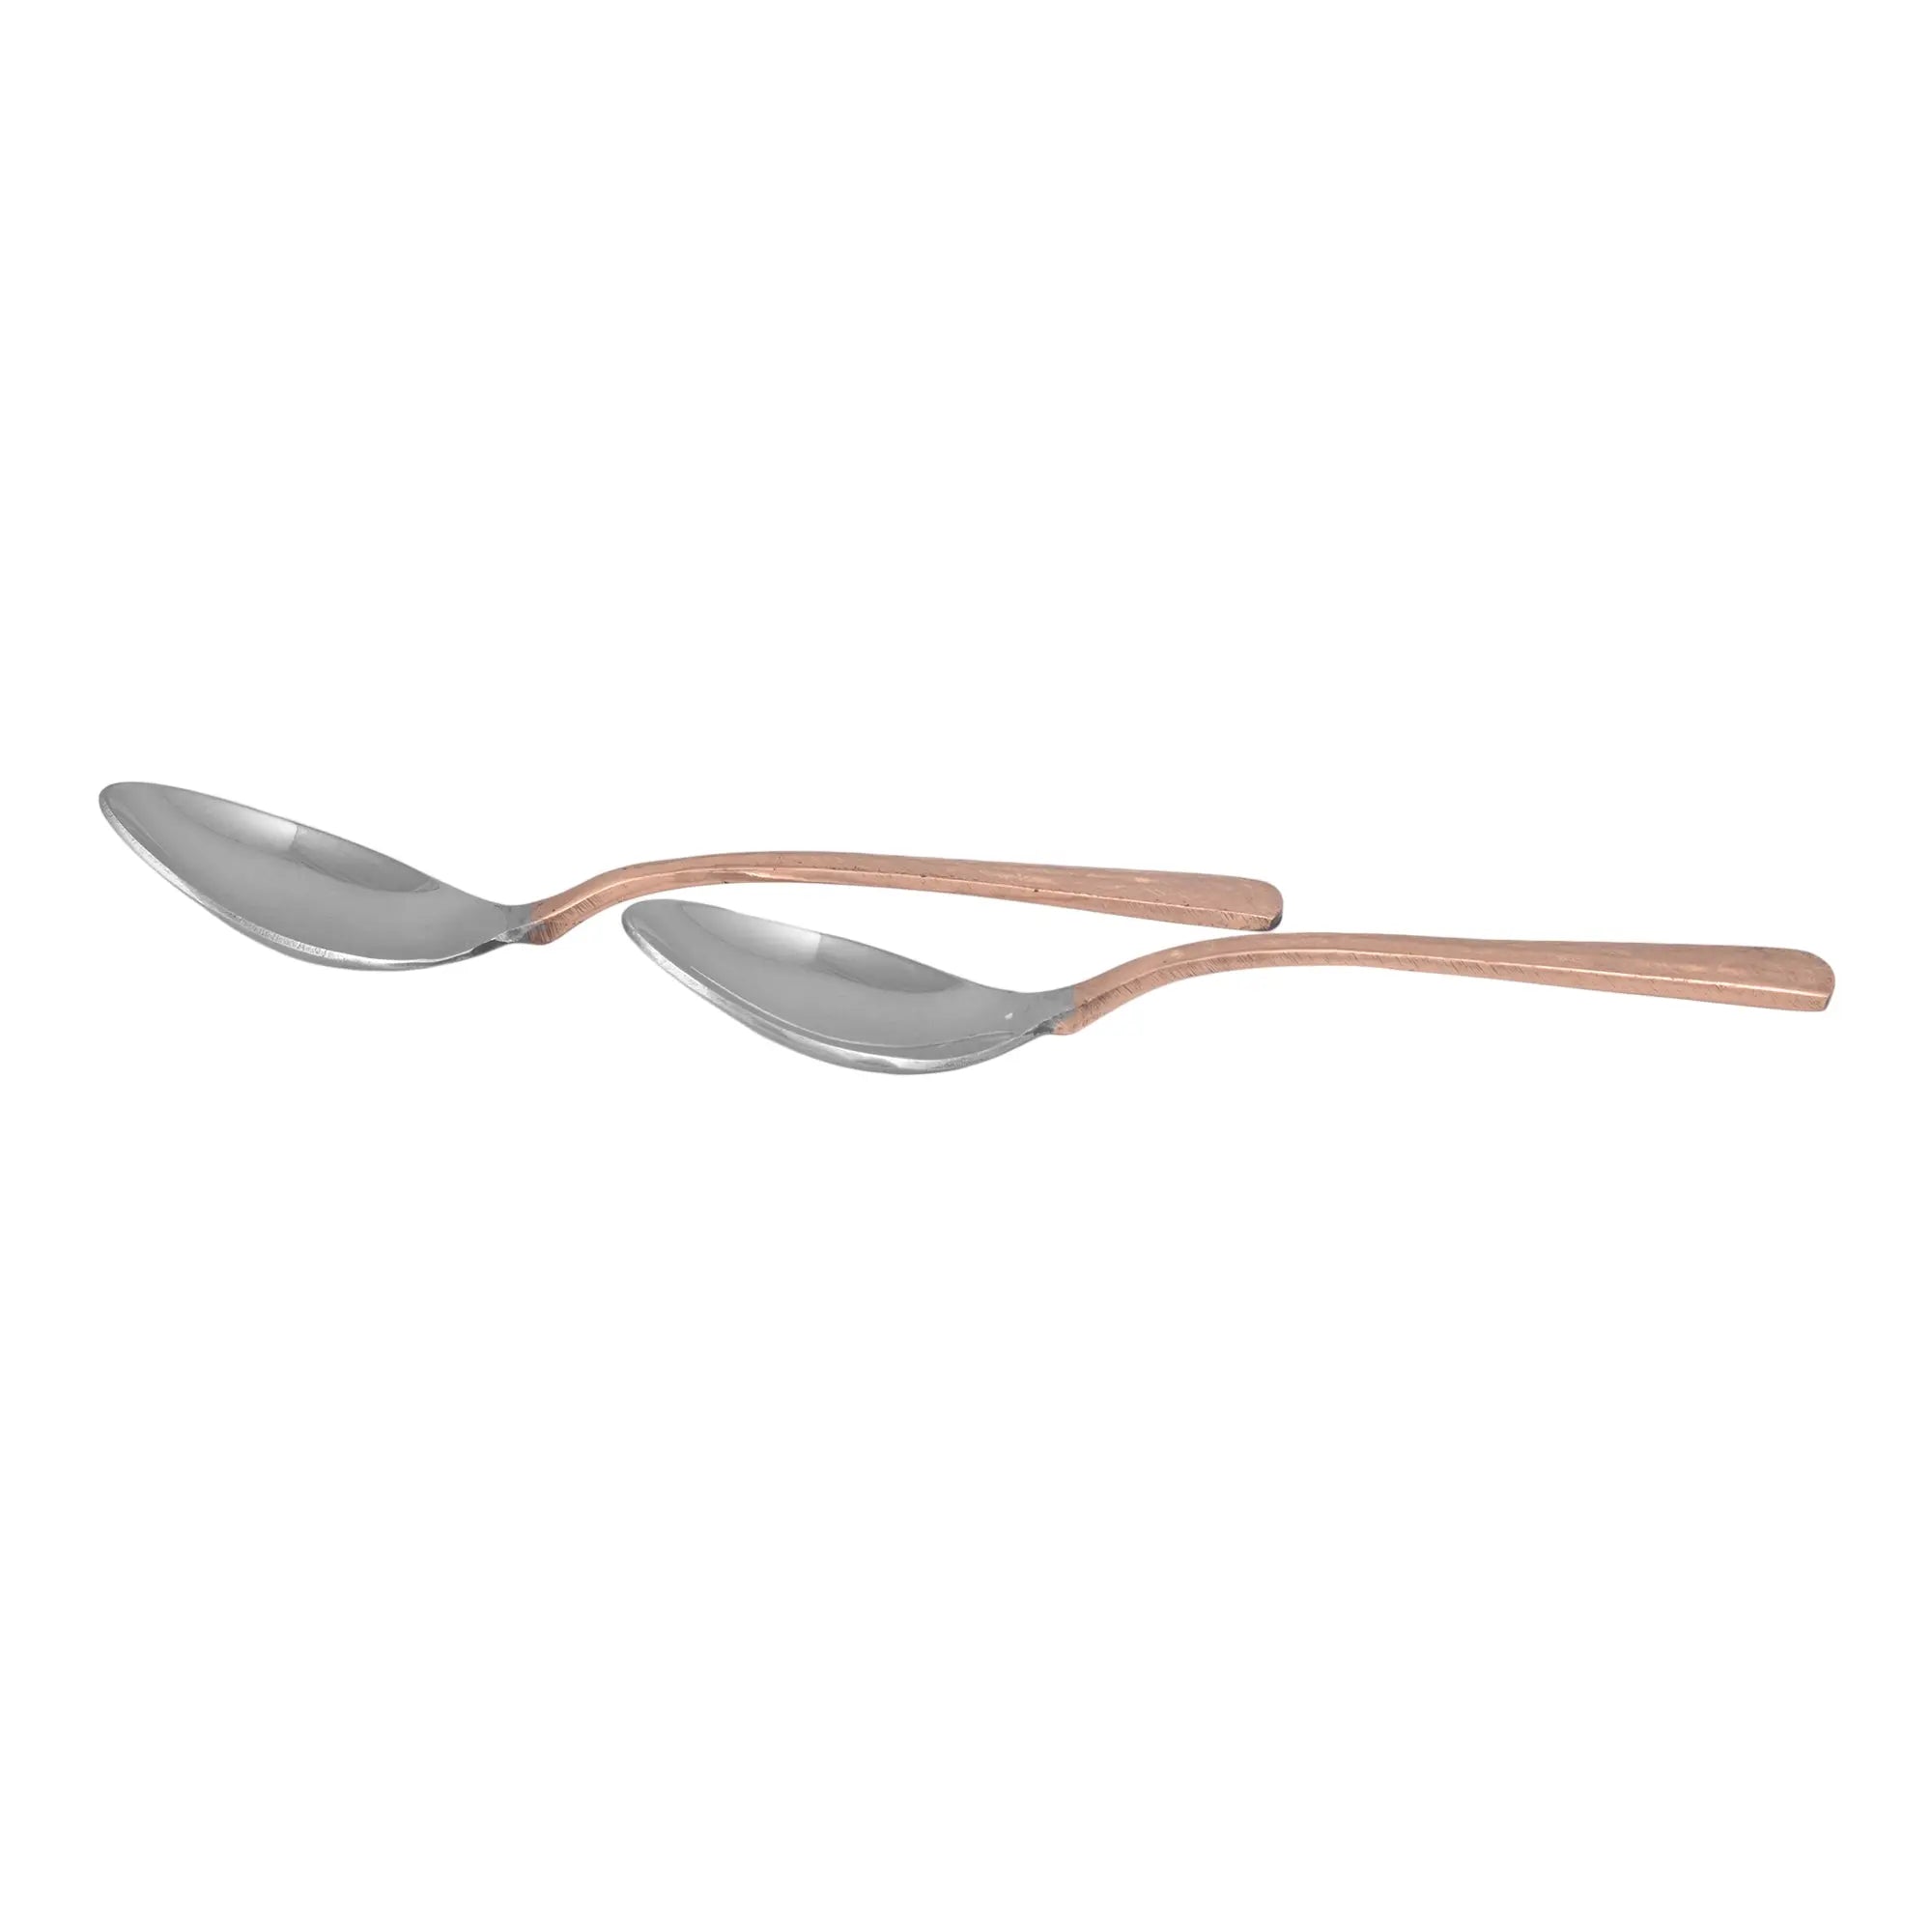 Copper Spoon With Hammered Finish - CROCKERY WALA AND COMPANY 